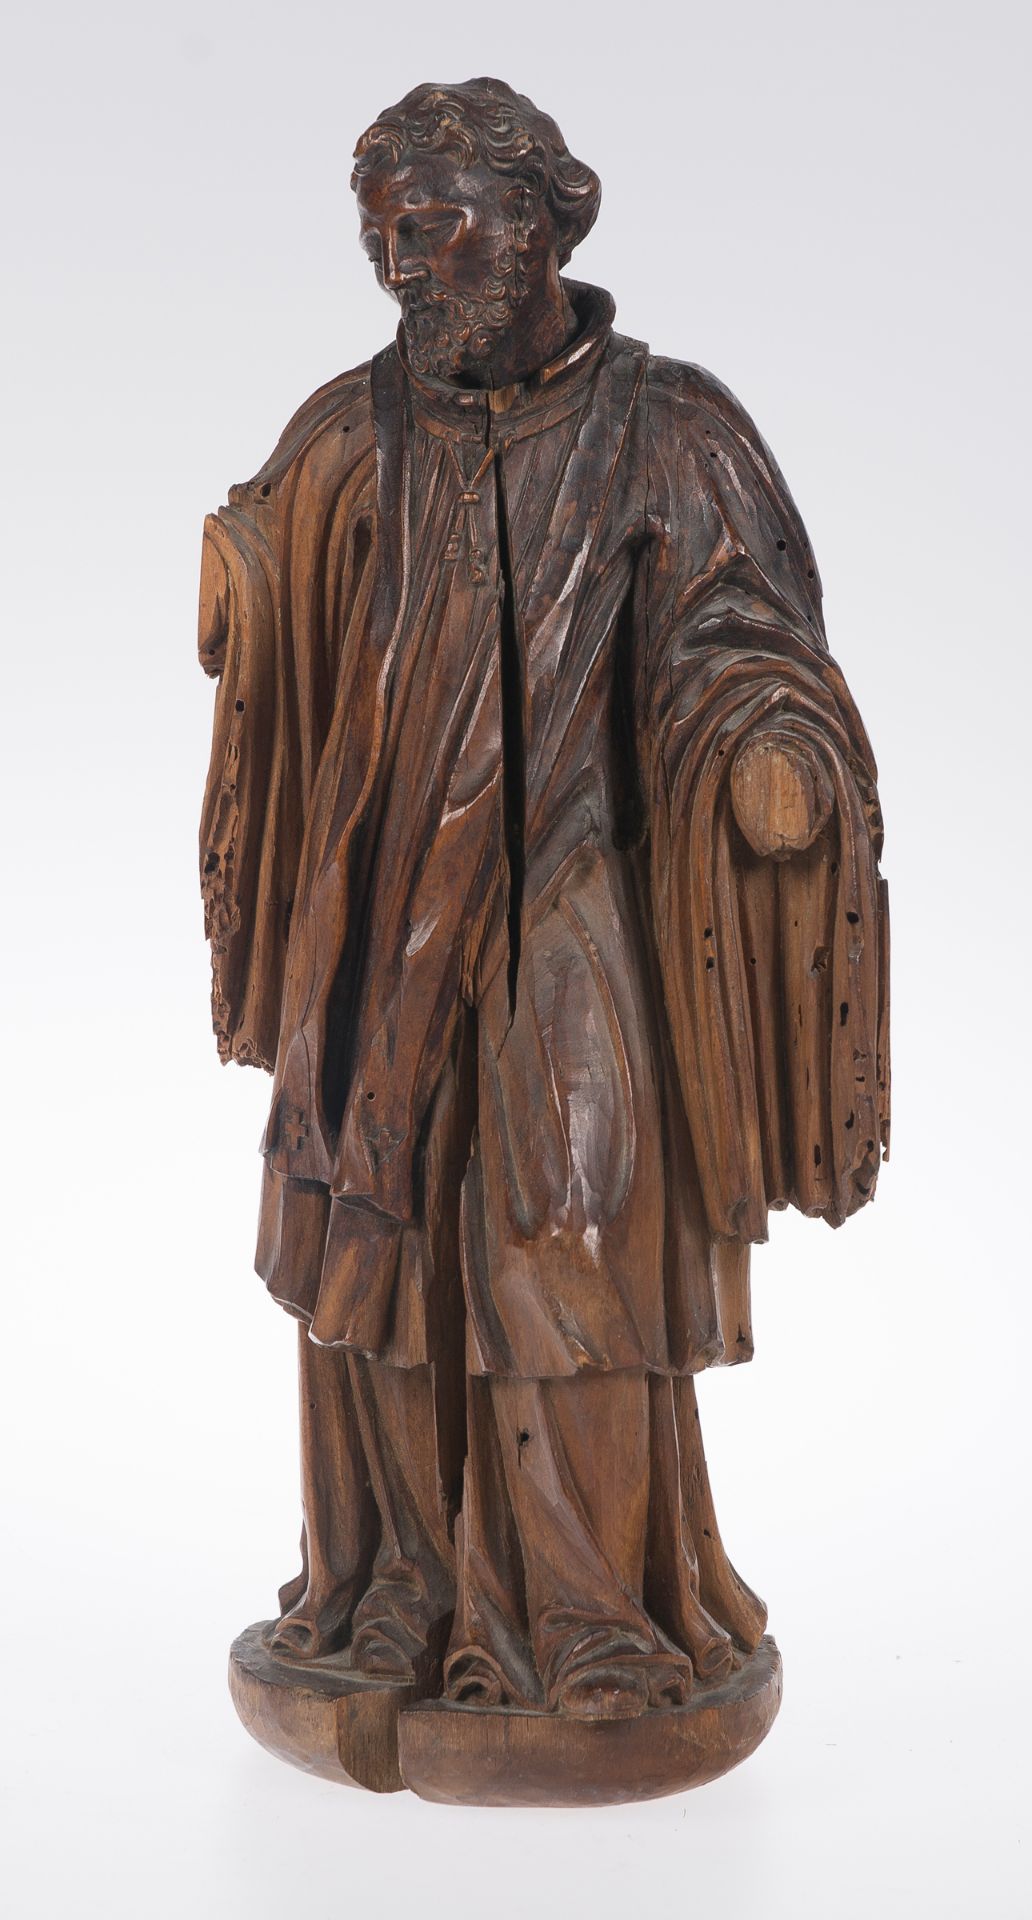 "Saint". Carved wooden sculpture. 17th century. - Image 2 of 4